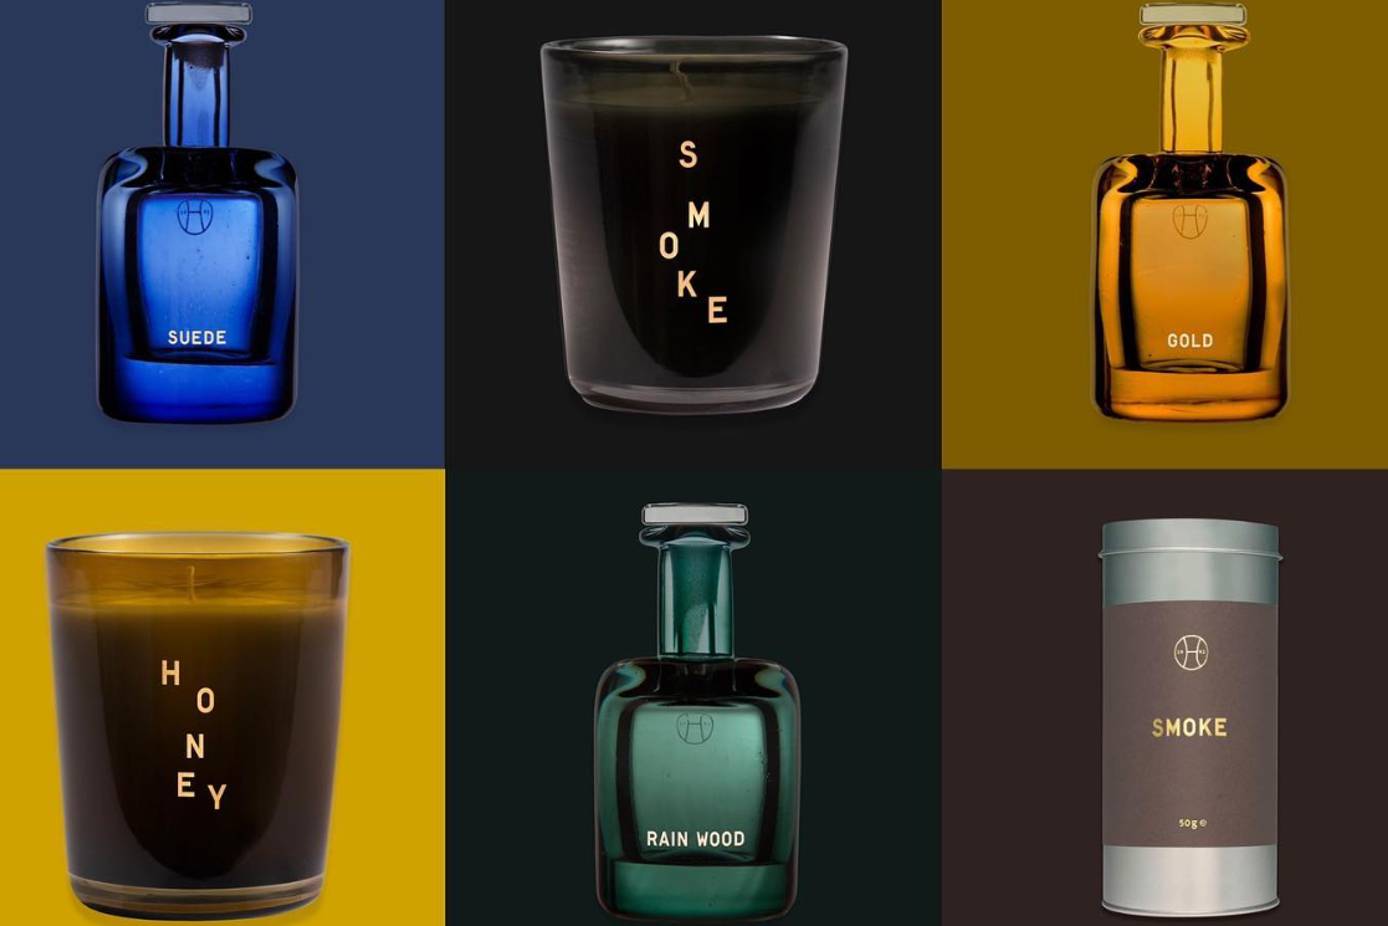 Natura &Co's corporate vehicle invests in Perfumer H